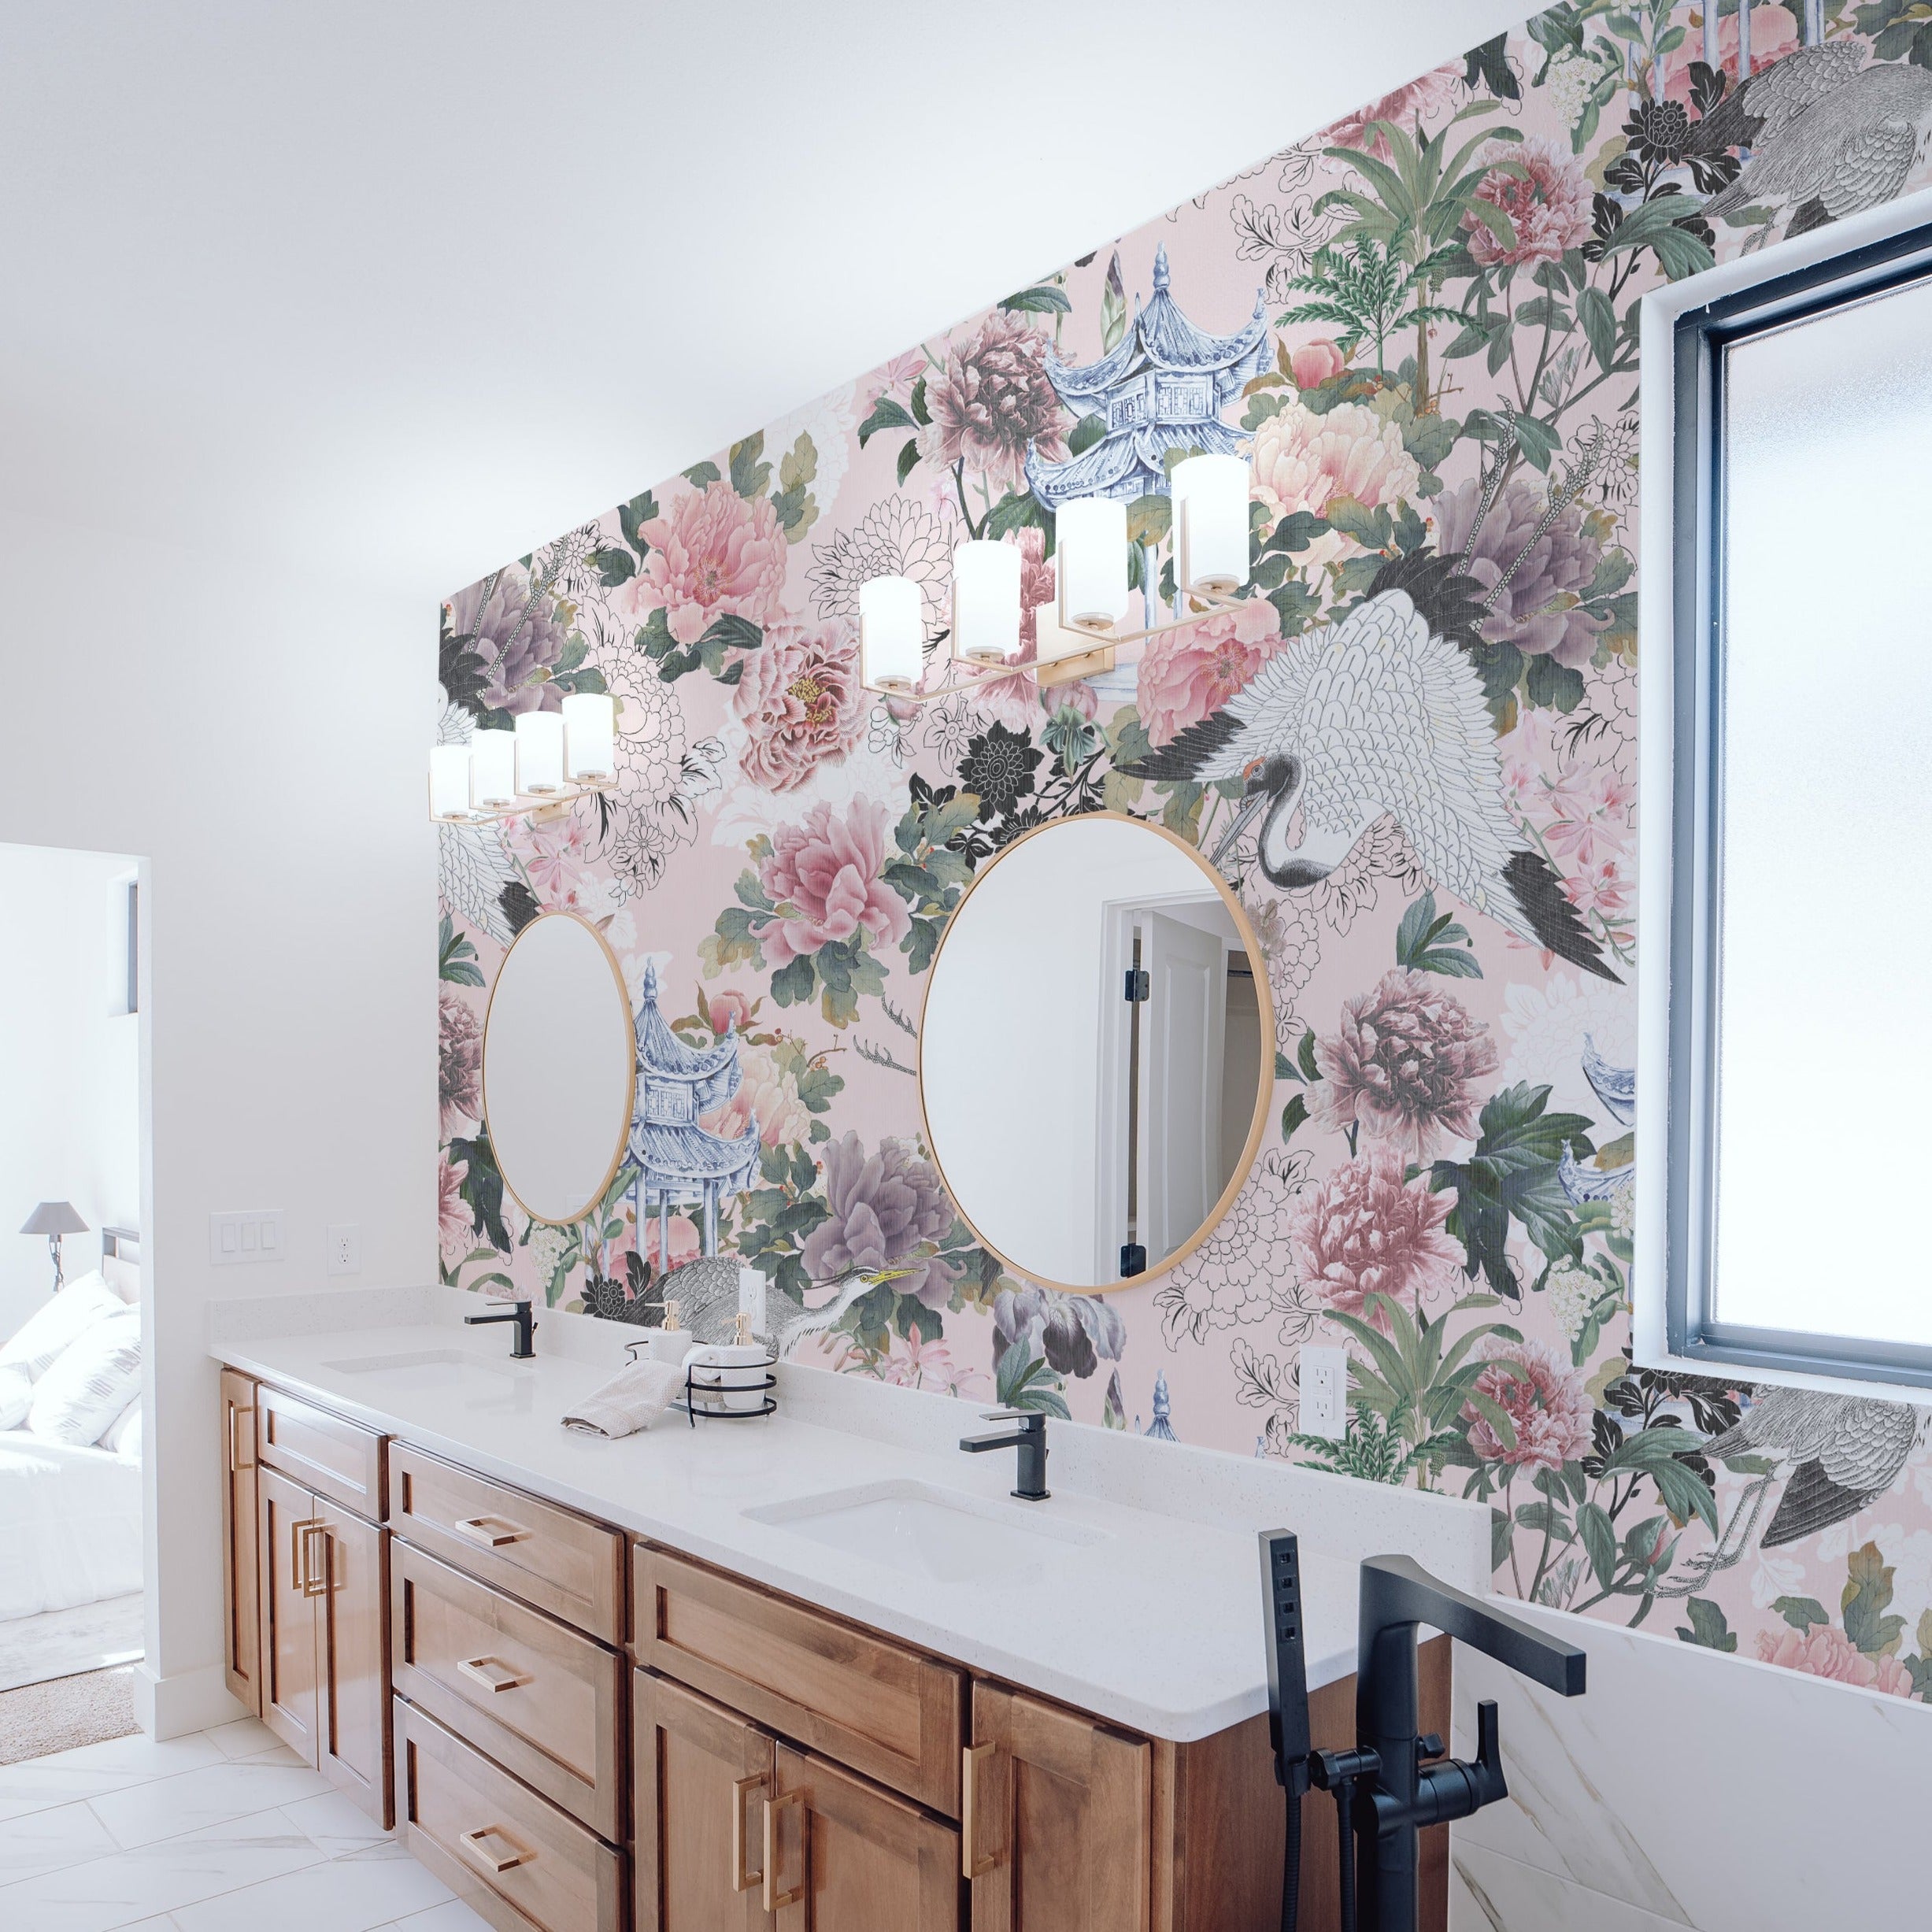 Modern bathroom decorated with Pink Kyoto Dreams Wallpaper, highlighting its lush floral and bird motifs with pink and gray accents. The design complements the sleek white countertops, round mirrors, and wooden cabinetry, enhancing the space with a touch of oriental elegance